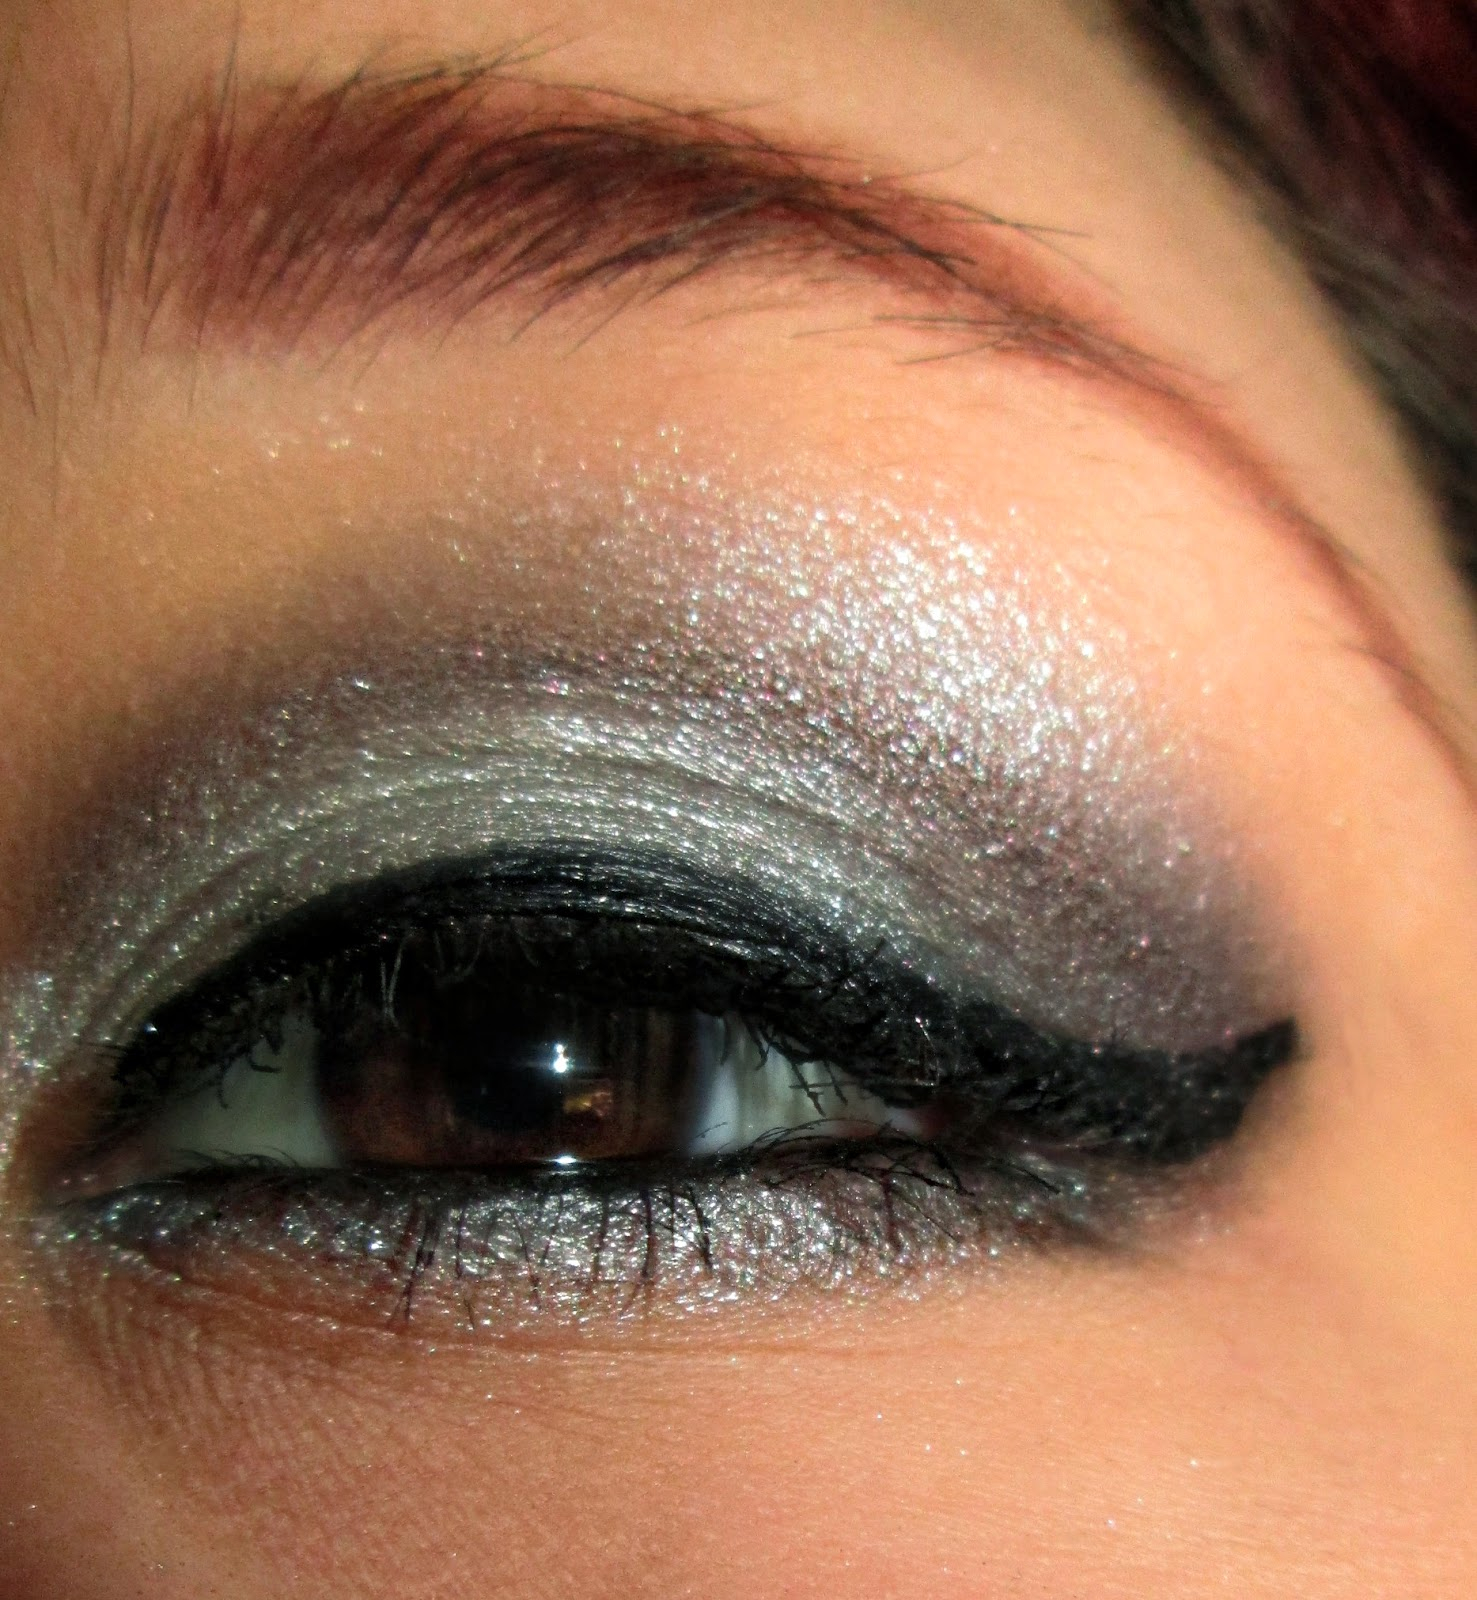 Prom Makeup Eyes Confessions Of A Makeup Fiend 2014 Prom Look 1